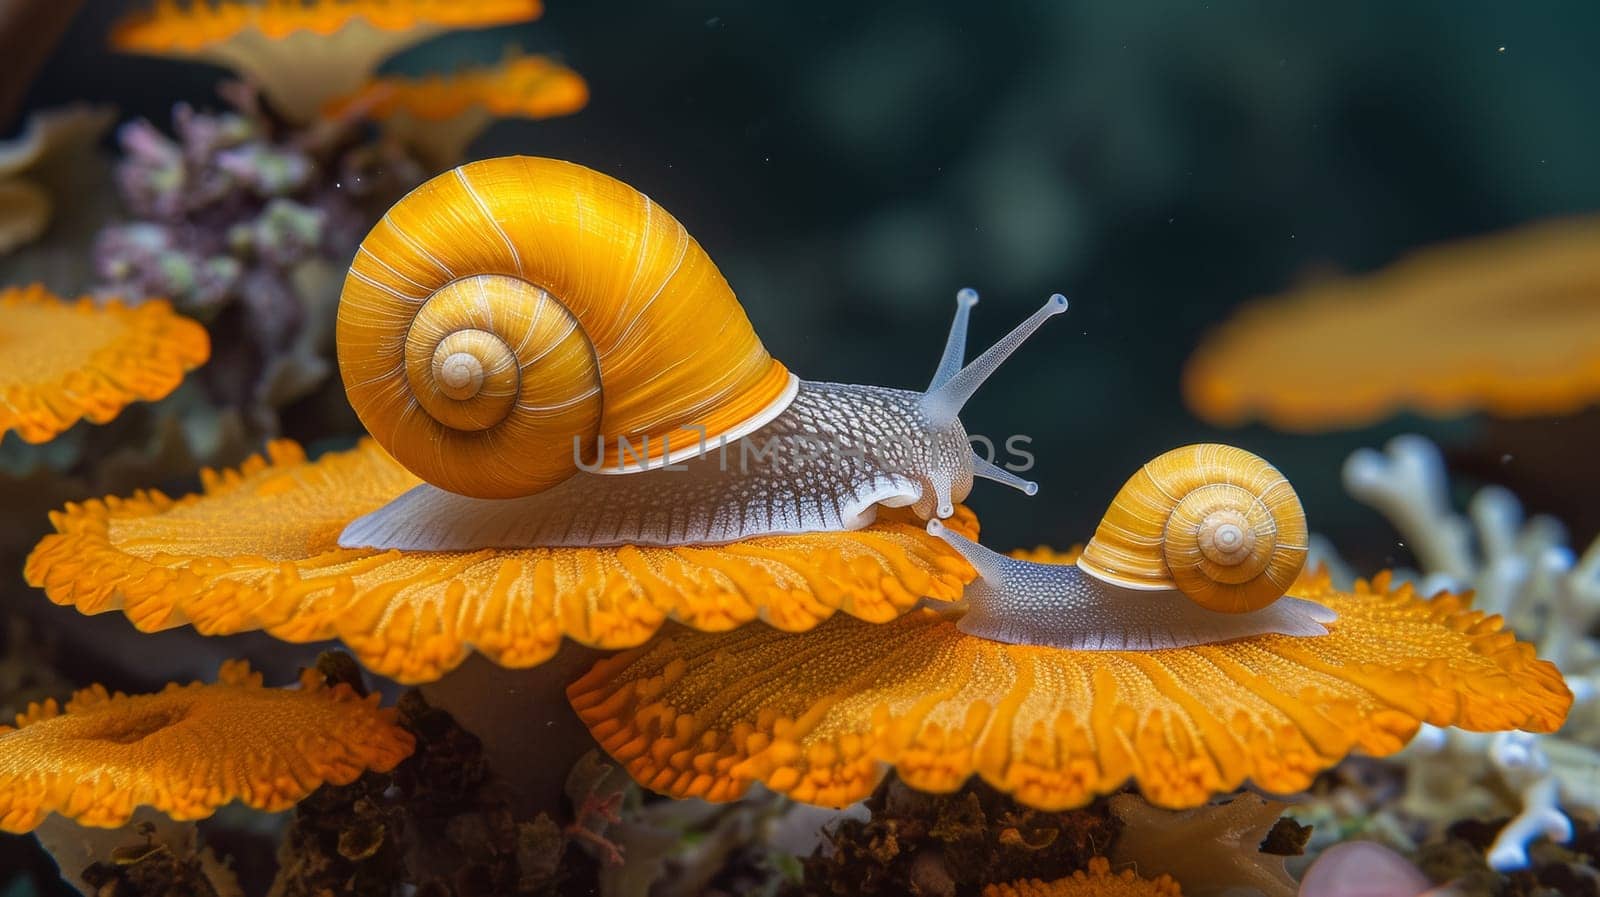 Two snails are on a coral reef with some other sea life